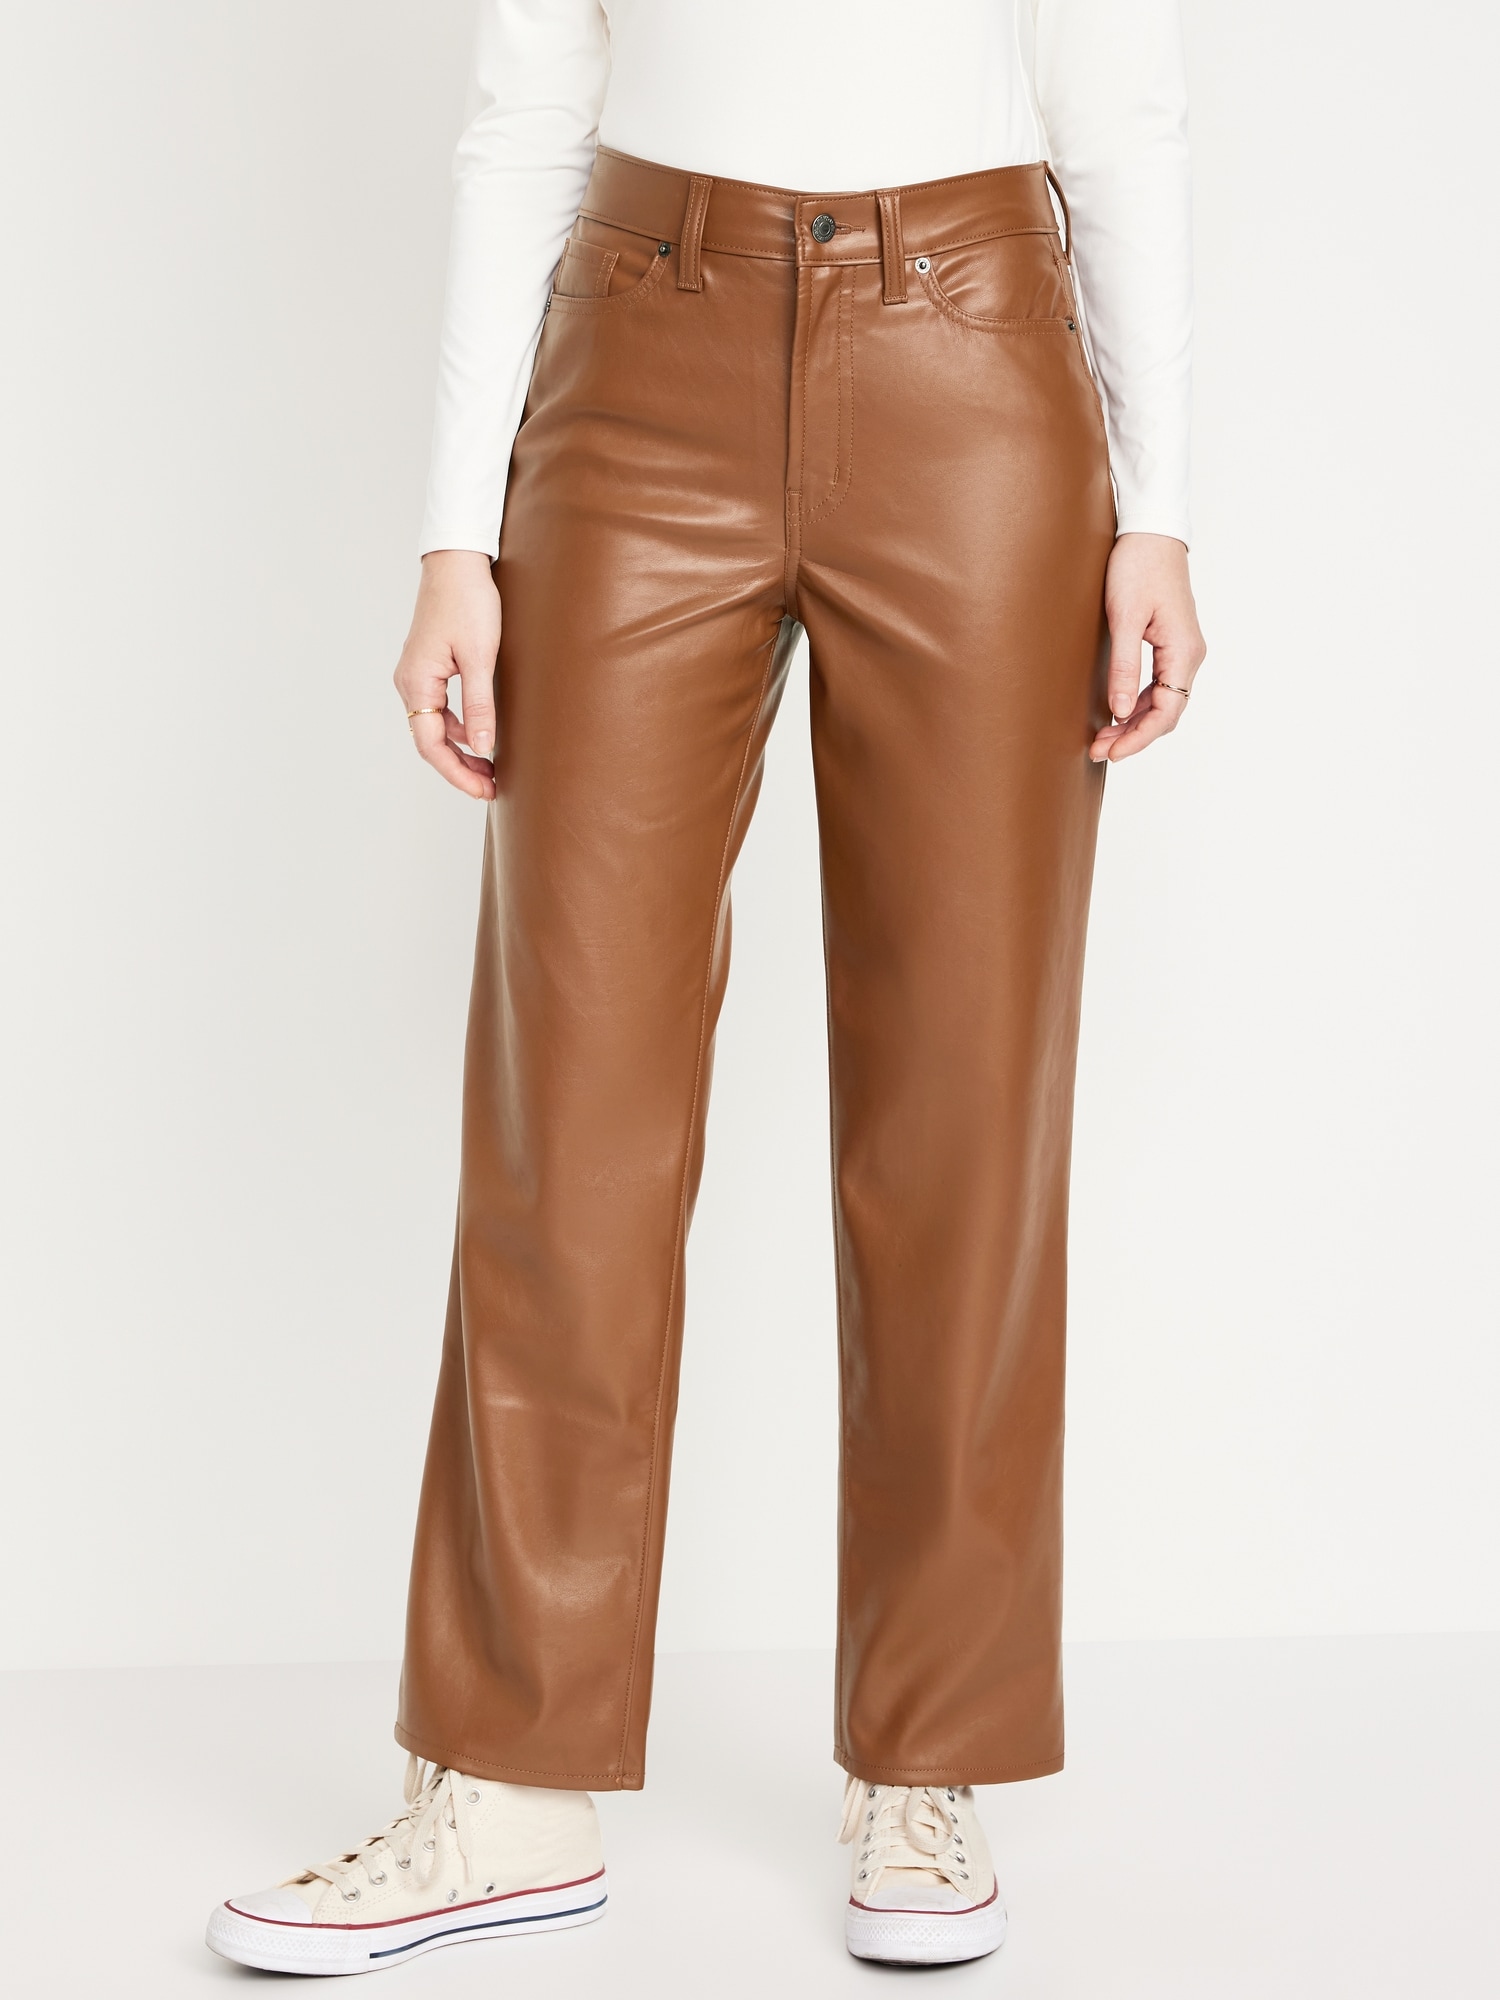 90s Vintage Leather Pants Bally/beige Leather Pants/bally Leather Pants/fashion  Pants Women/design Leather Pants 